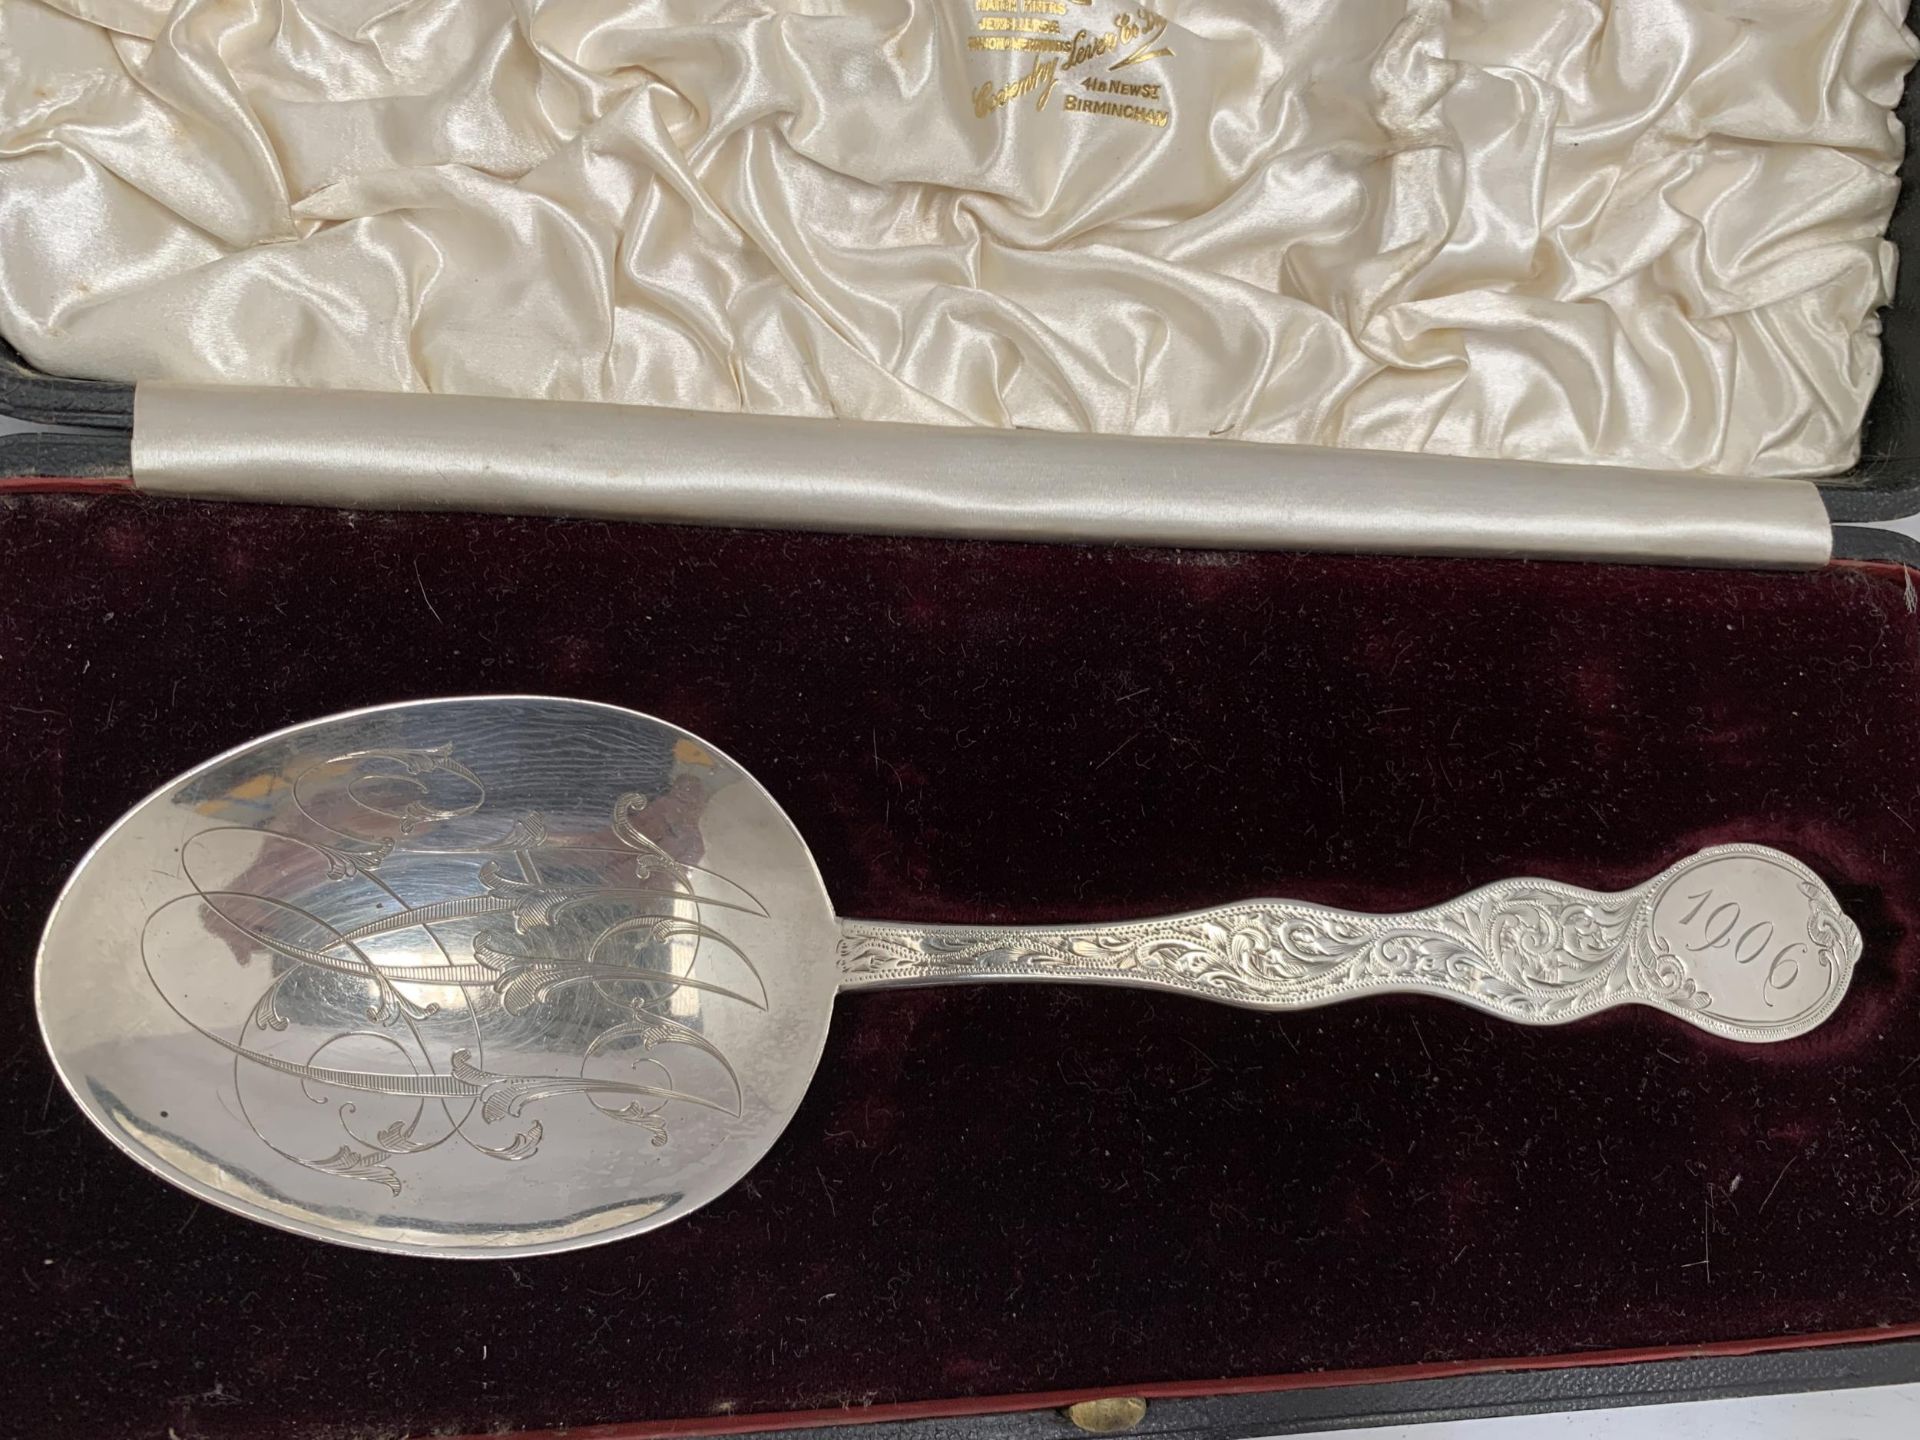 A 1906 HALLMARKED SILVER SERVING SPOON IN CASE - Image 2 of 3